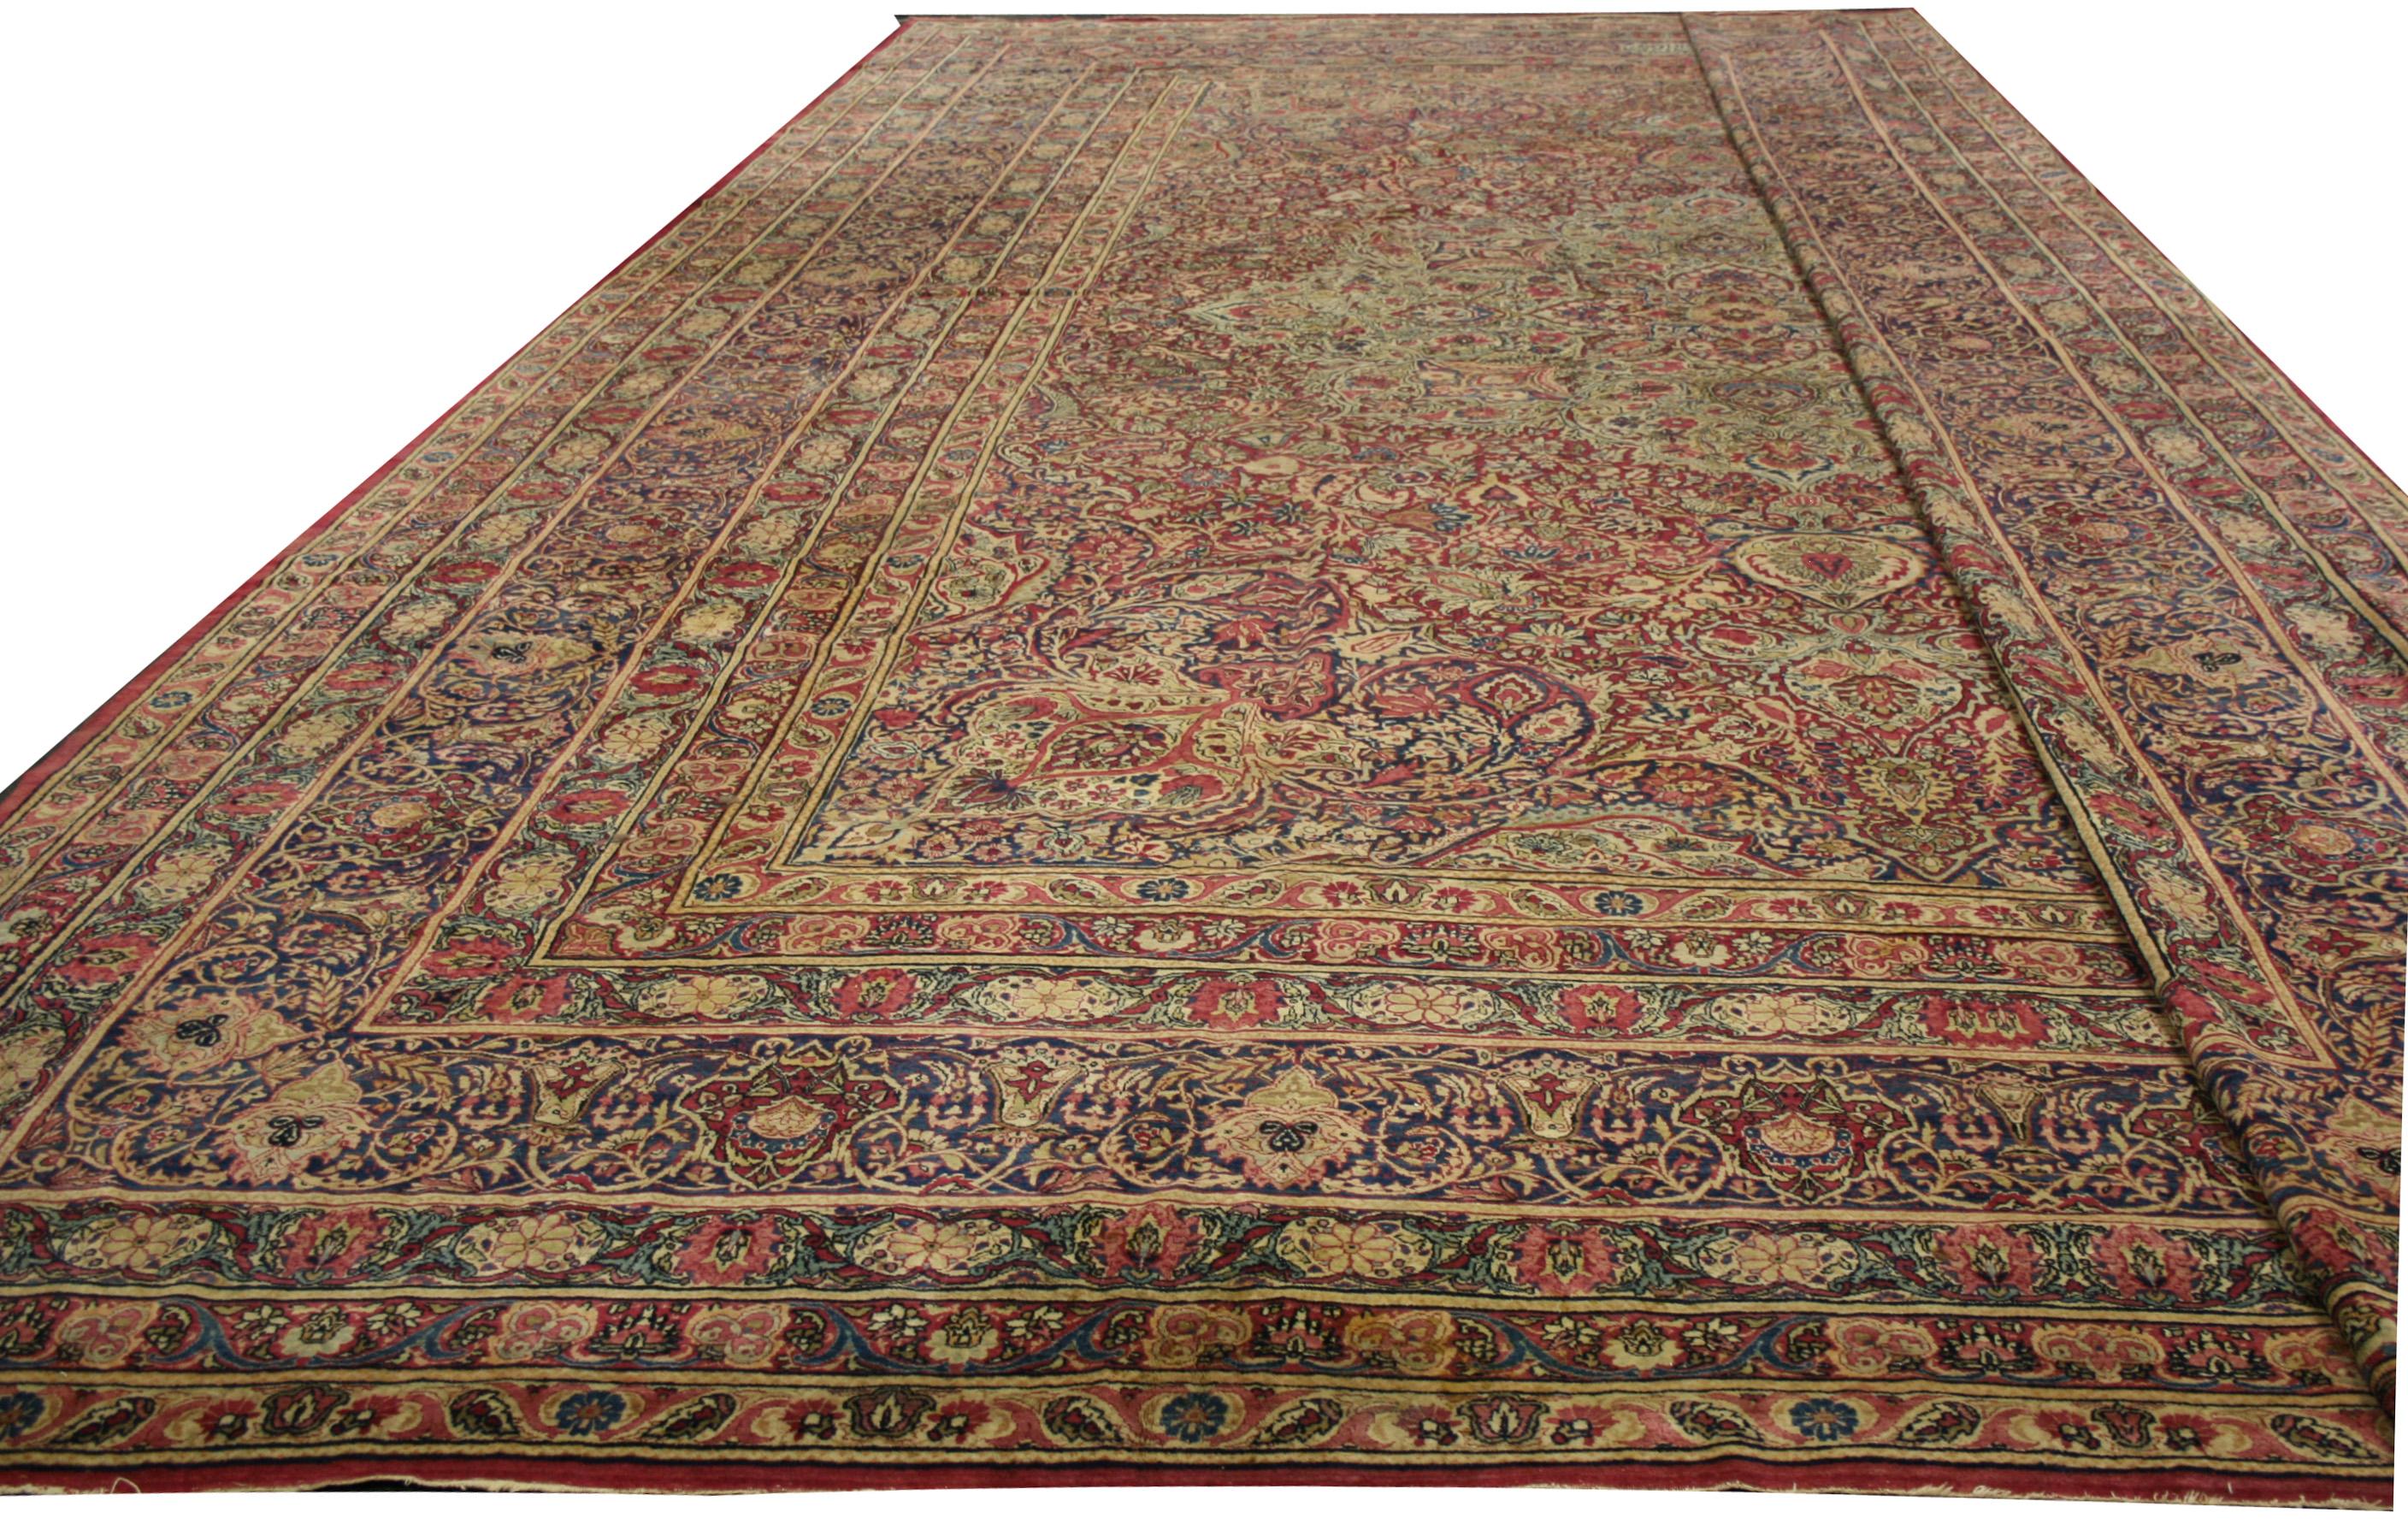 The detail in this rug is true testament to the artistic merits of Lavar rugs. The central floral medallion, centered by a deeper colored element, is enclosed in an intricate floral design. The main border is itself enclosed in multiple smaller